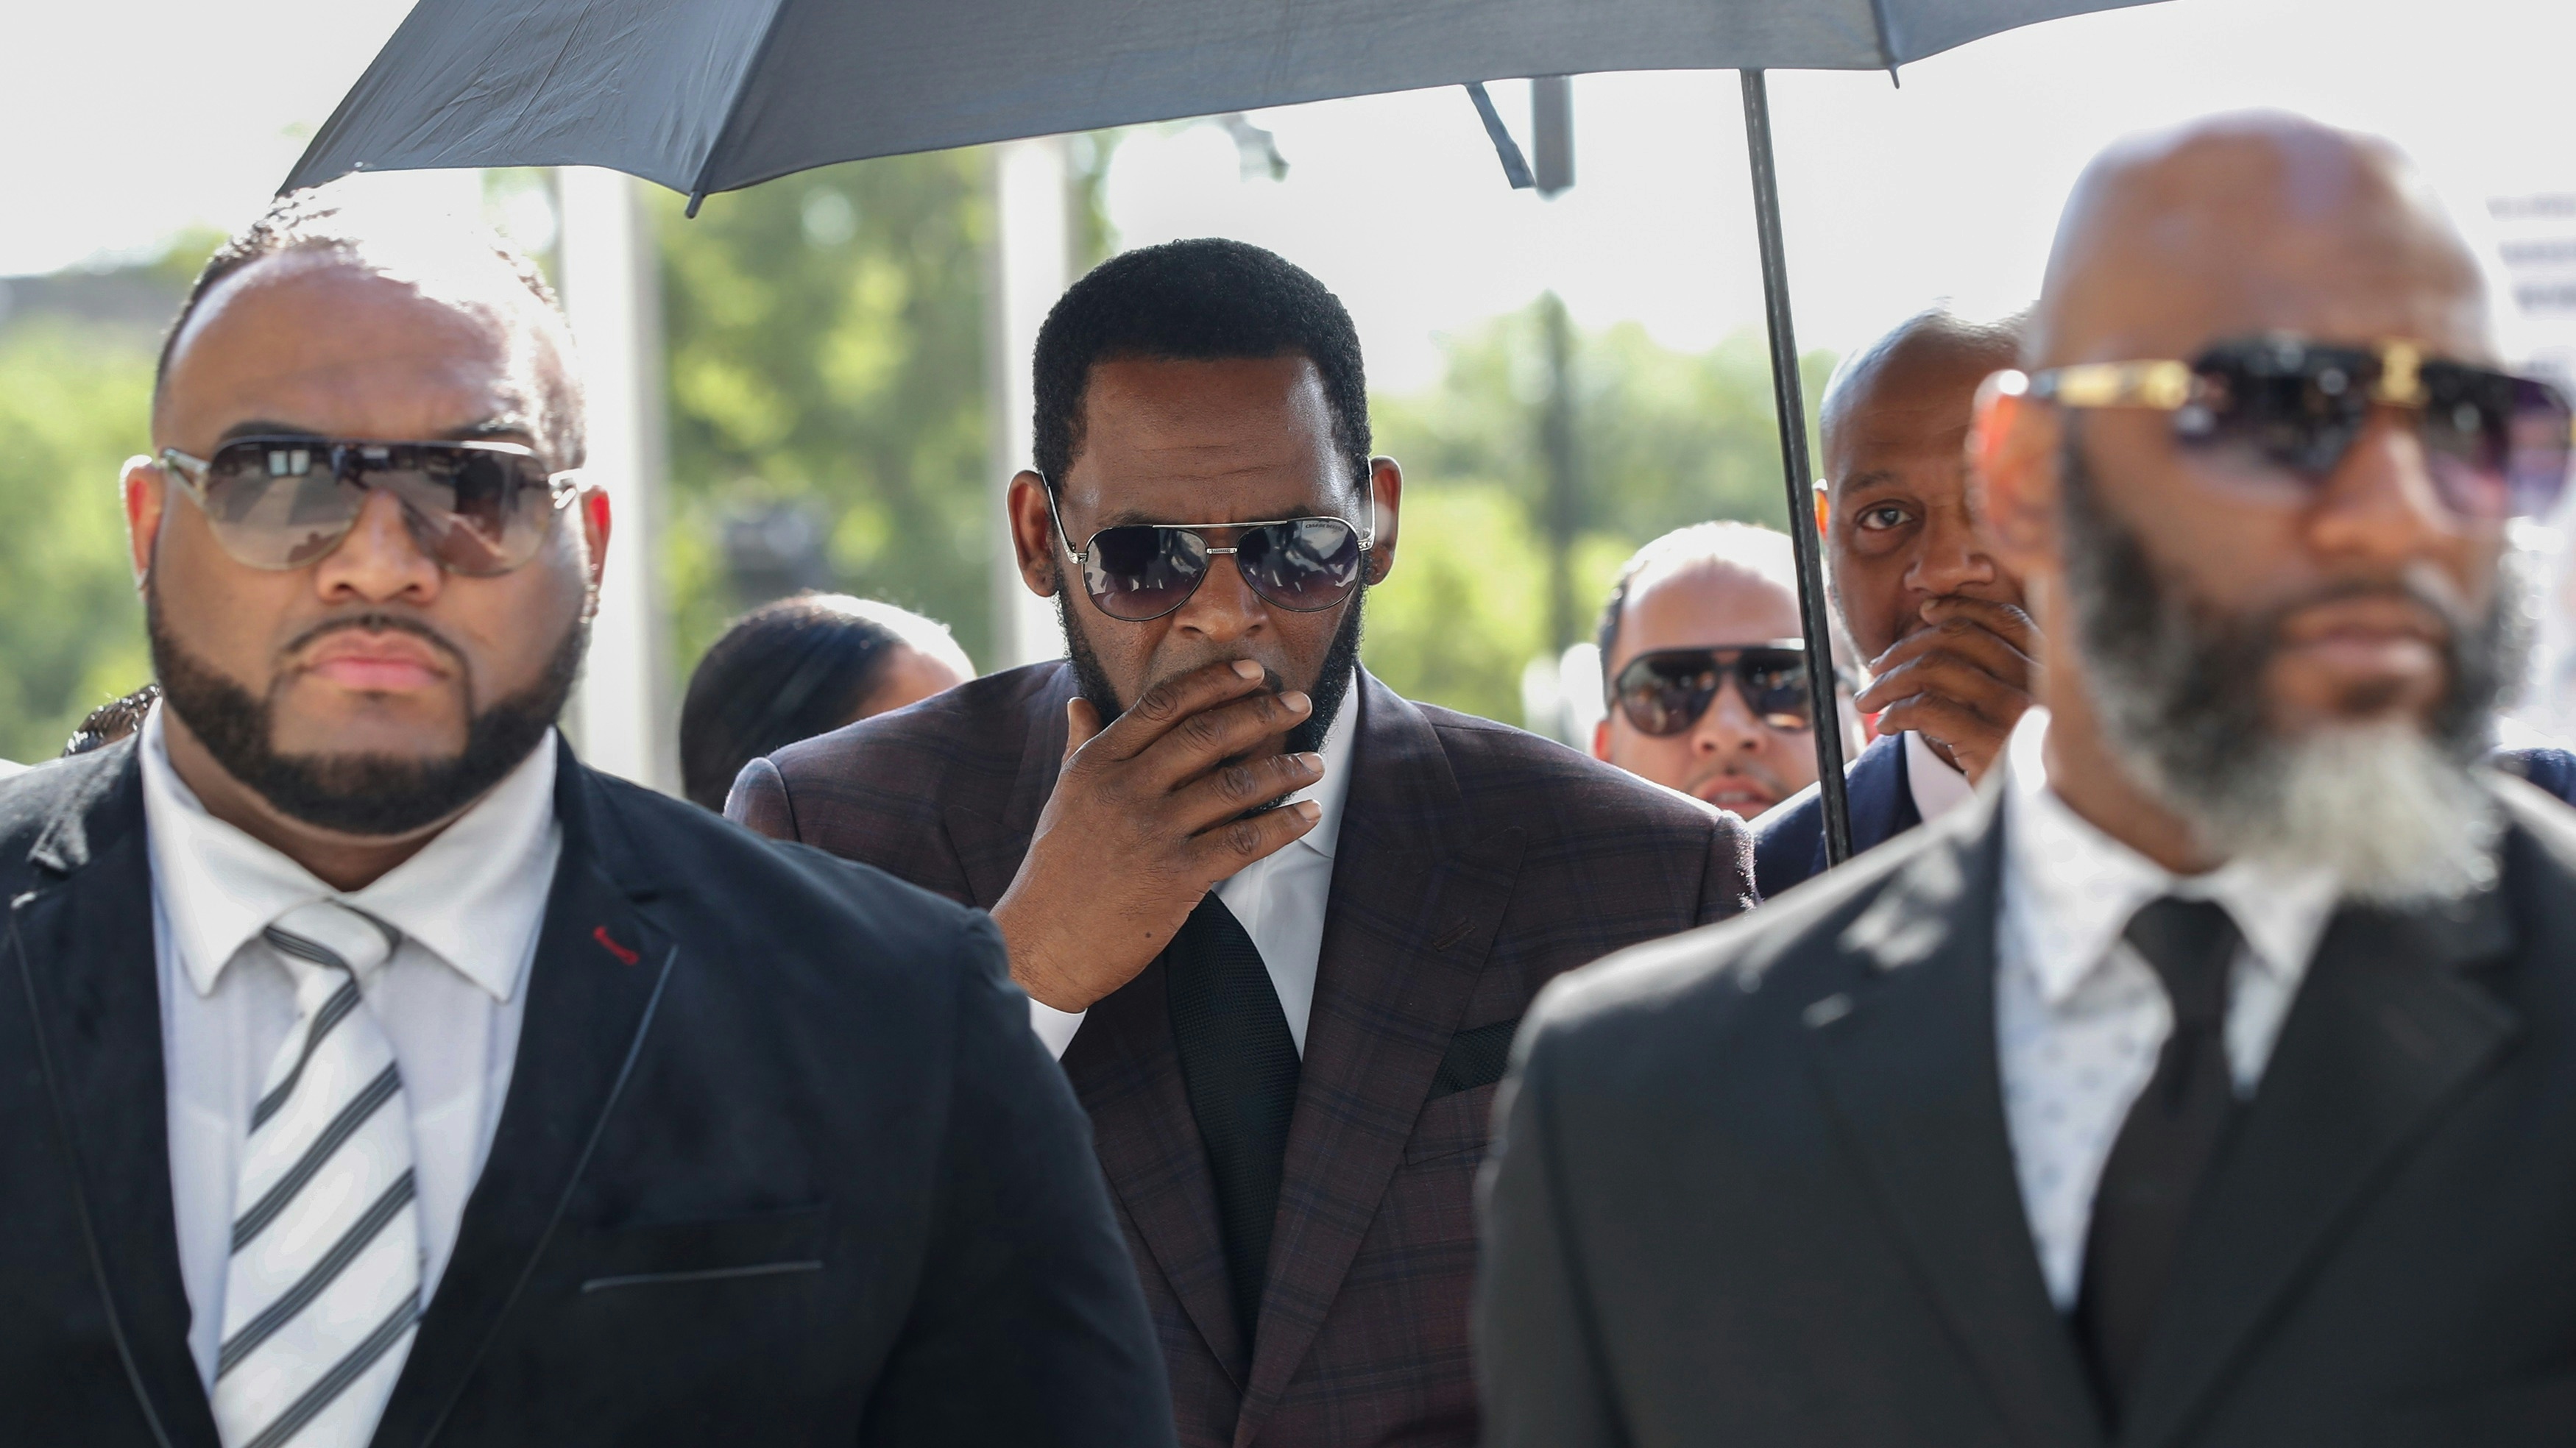 R. Kelly arrives for a hearing on sexual abuse charges